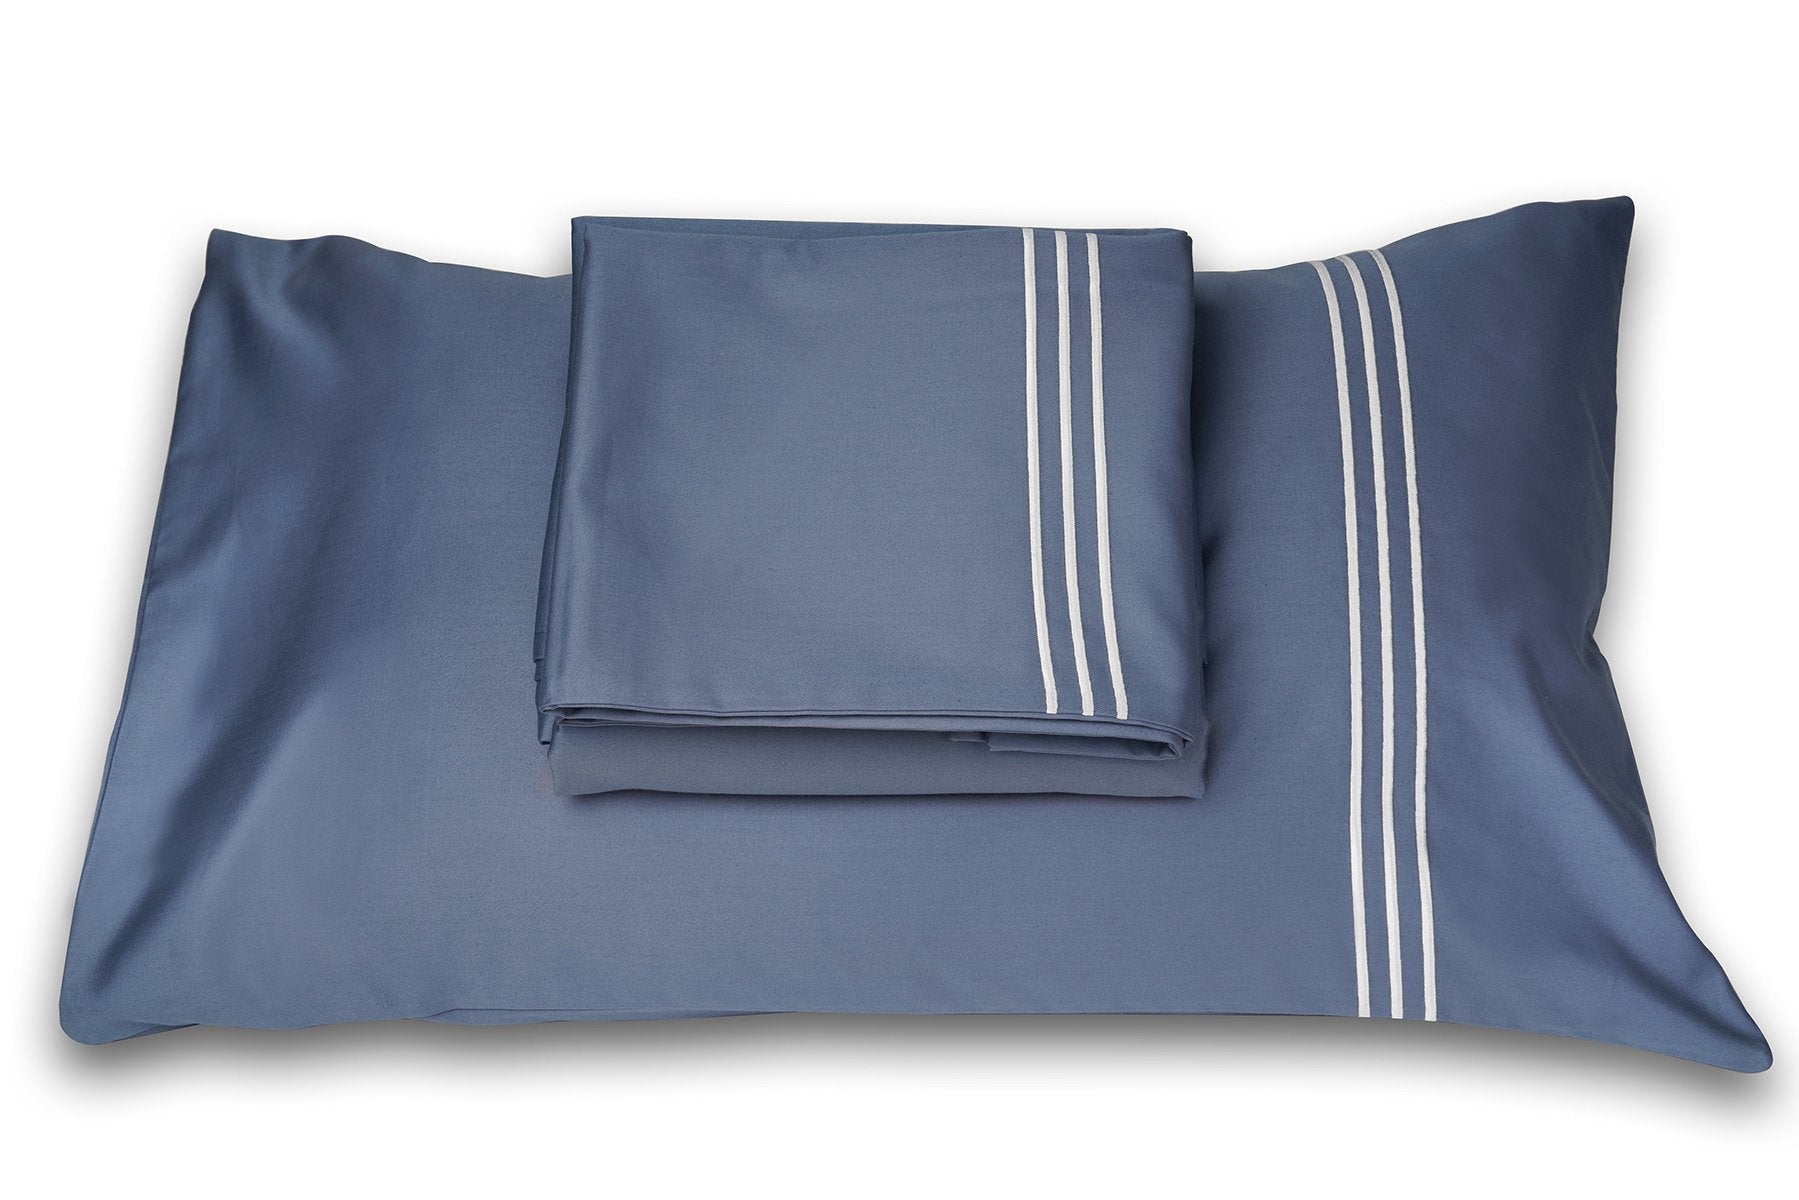 3 Stripes Moonlight Blue Cotton Sateen Bed Sheet by Veda Homes - Home Artisan